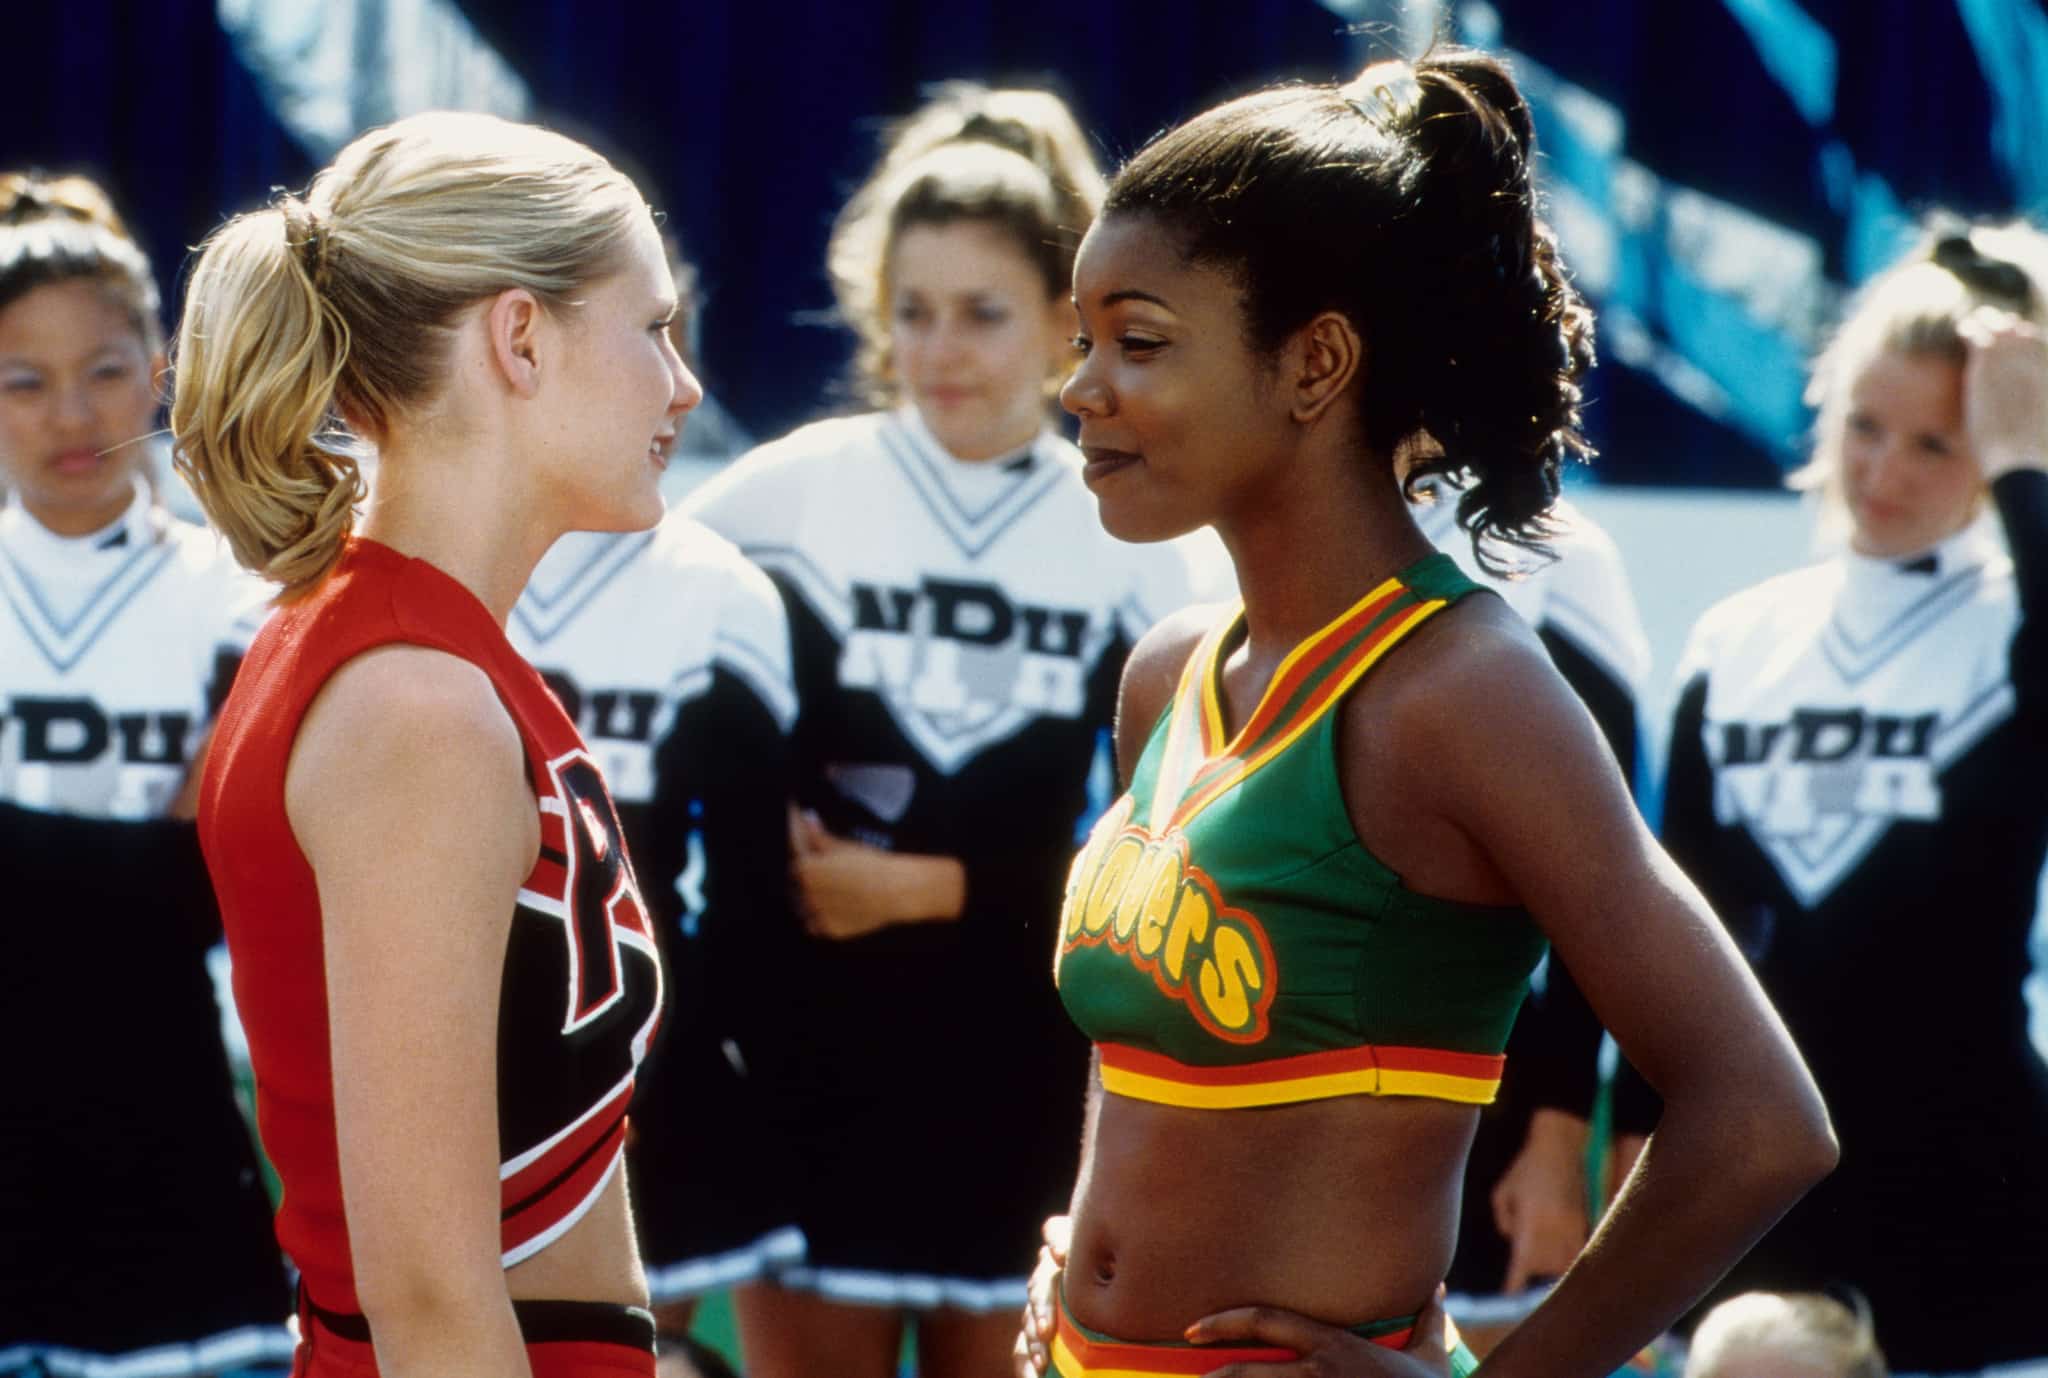 Two cheerleaders face off in this image from Beacon Pictures.